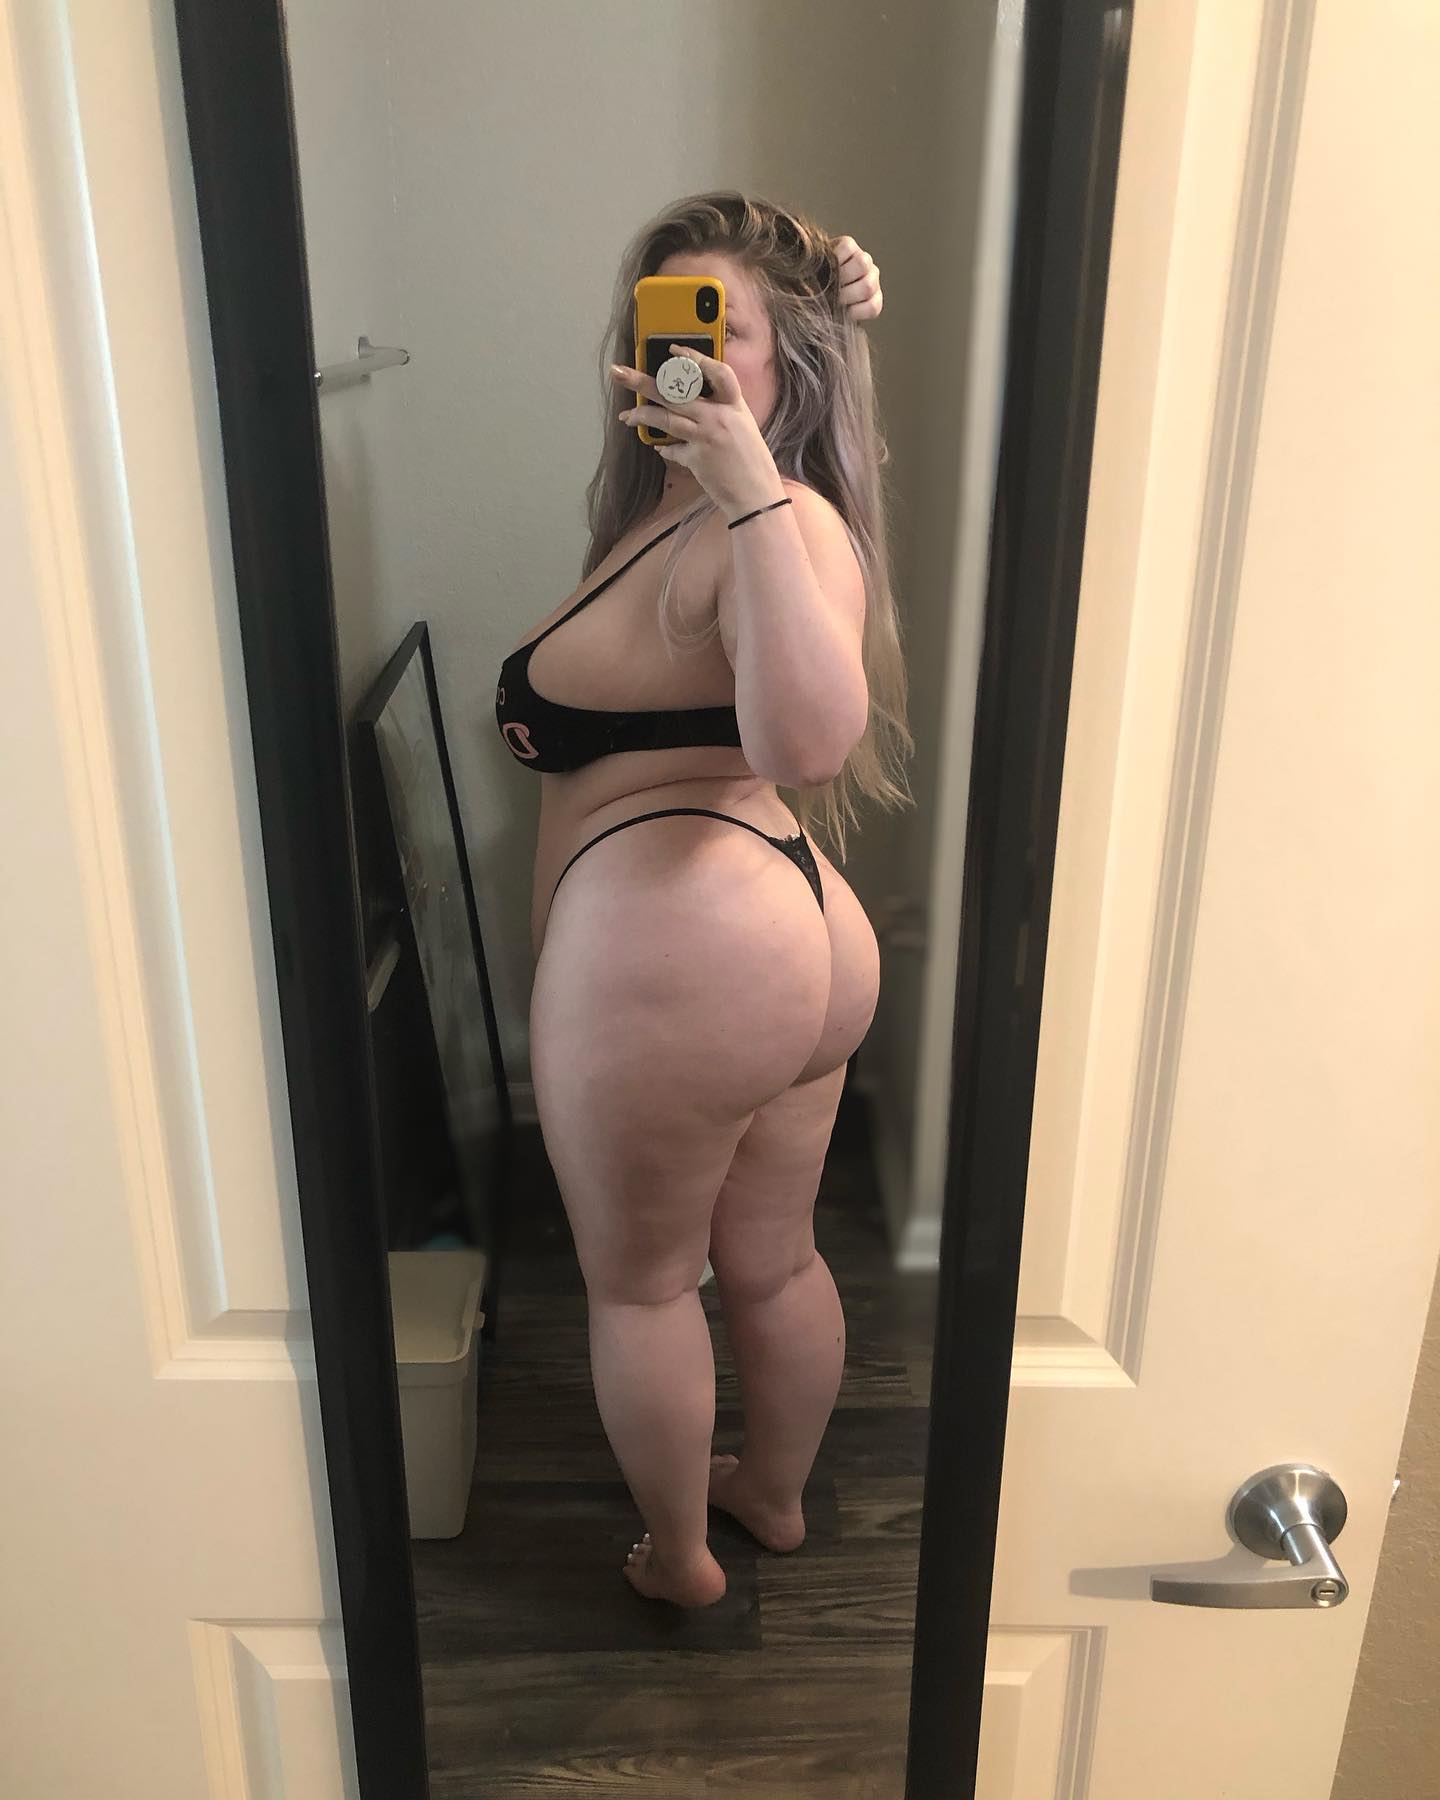 I heard you like thick girls 😈 Check out my Onlyfans sale for more 💦
————————————————————————

#curves #curvy #curvygirl #thicc #thiccgirls #thickgirlproblems #thickwhitegirl #thickthighsprettyeyes #thickthighssaveslives #girl #tinybikinitops #explorepage #explore #explorepage✨ #plussize #plussizemodel #thickwomen #thickwhitegirl #curves #curvy #curvyblond #curvygirl #thicc #thiccgirls #thickgirlproblems #contentcreator #onlyfans #reddit #thickwomen #plussize #beauty #naturalcurves #hourglassbody #fans #baddie #fansonly #spicyaccountant